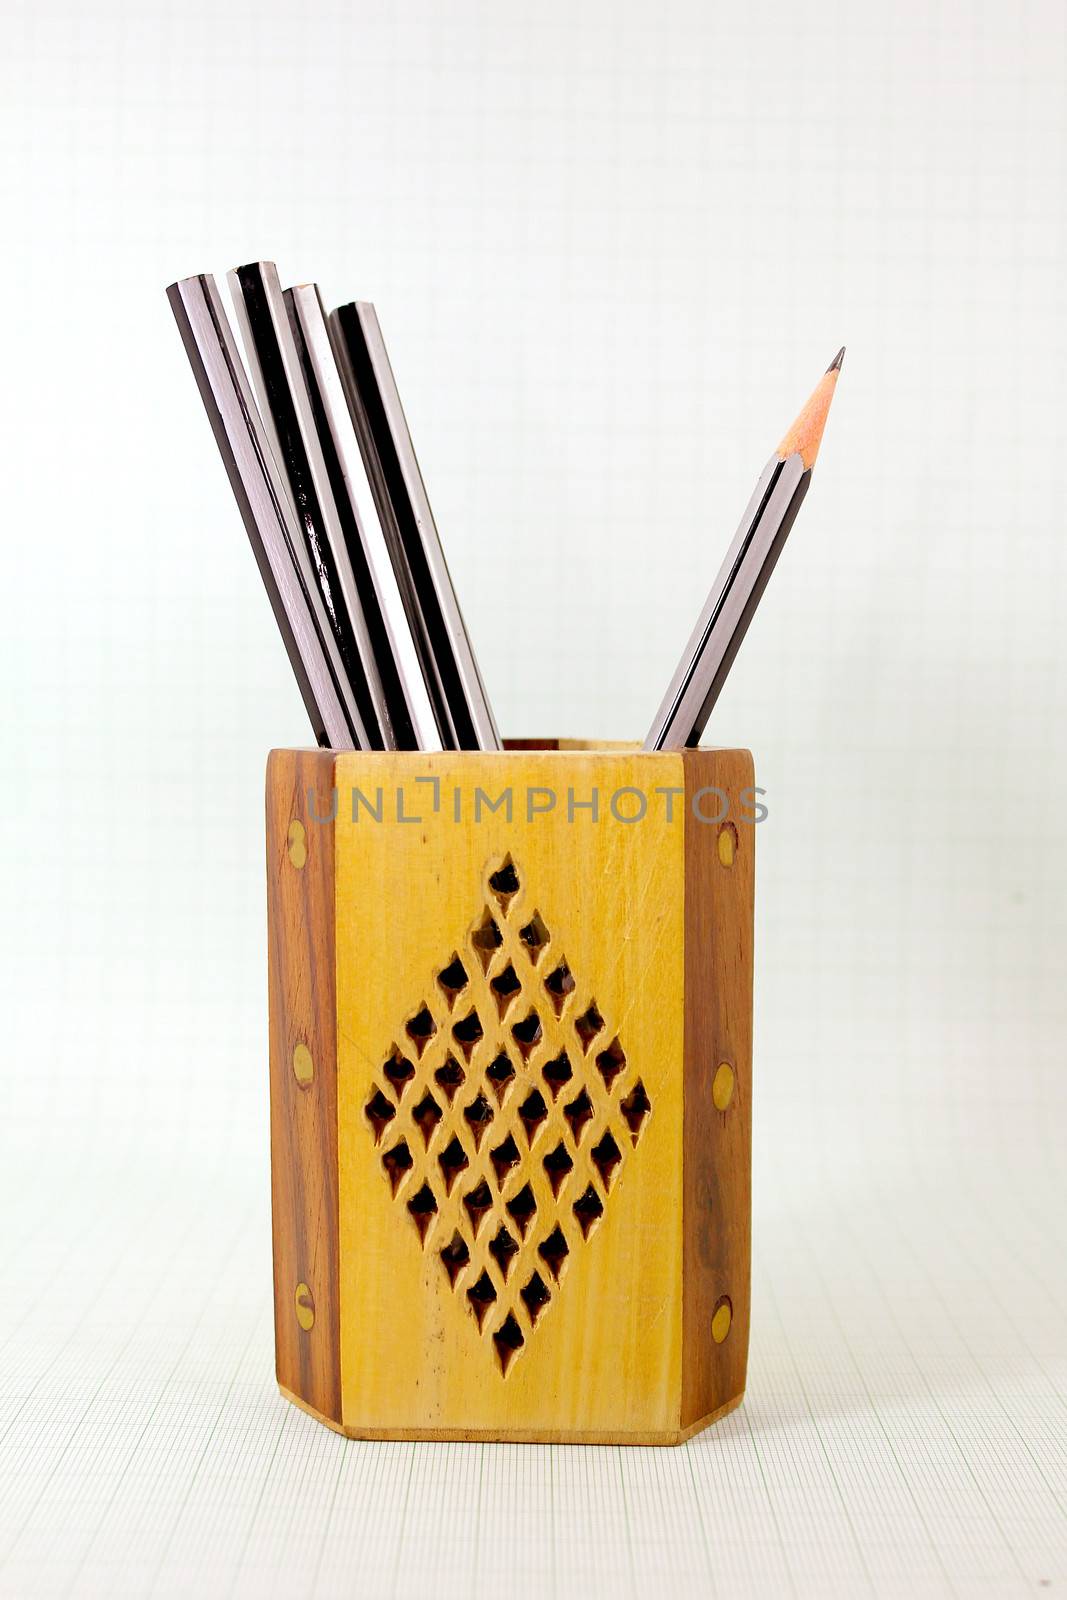 sharp pencil stands alone in the pencil stand